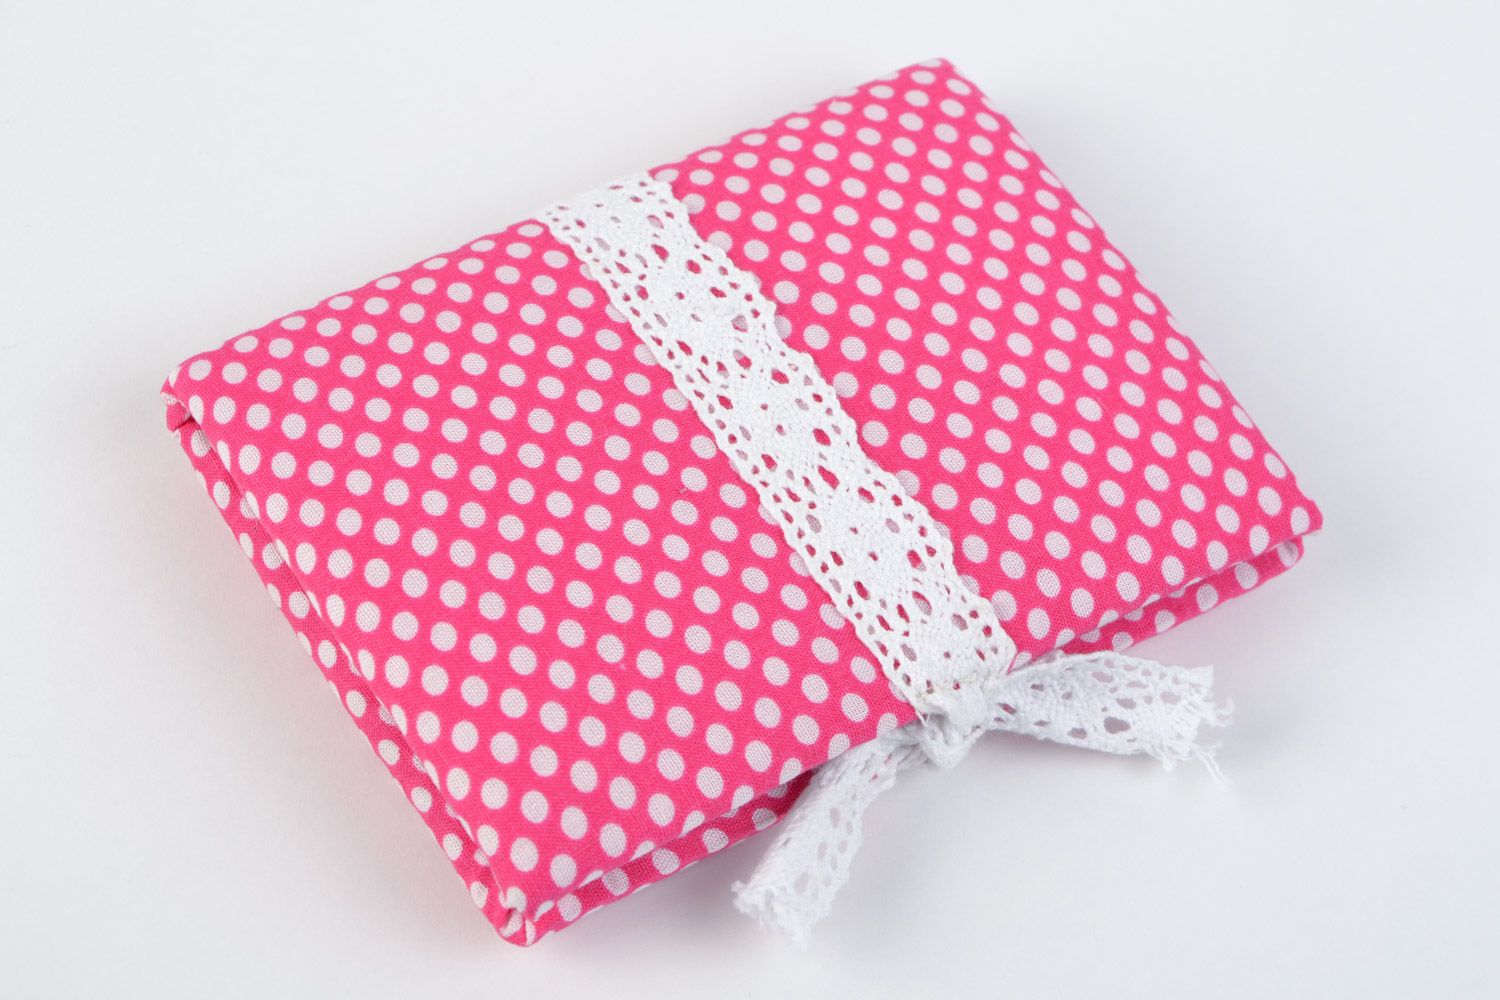 Handmade notebook with bright pink and white polka dot fabric cover for 60 pages photo 1